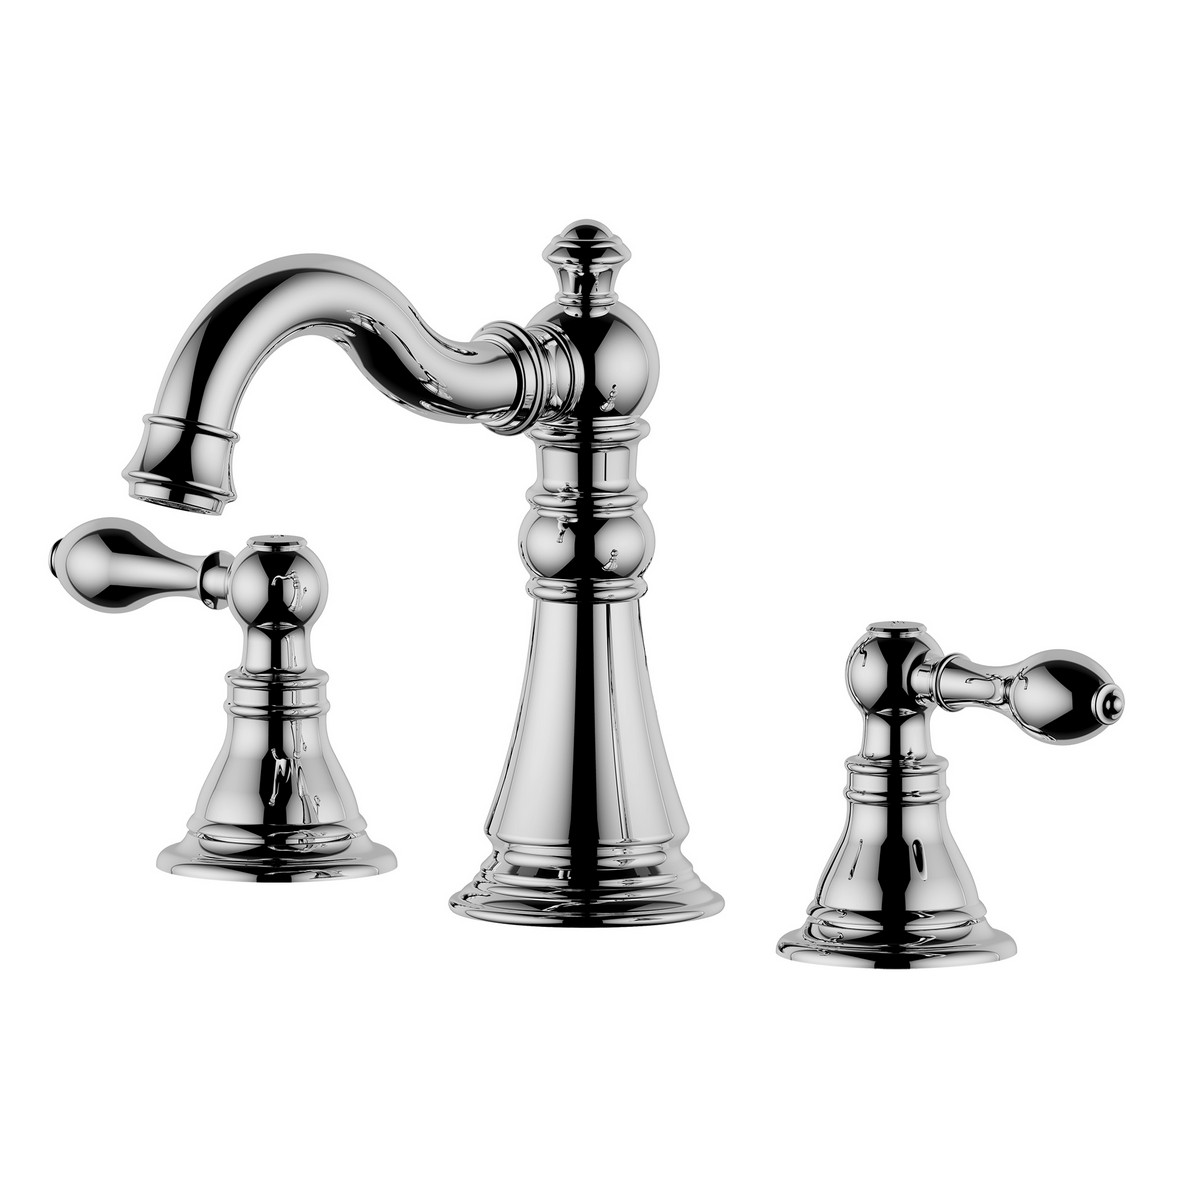 ULTRA FAUCETS UF5511 SIGNATURE WIDESPREAD DECK MOUNT TWO HANDLE BATHROOM FAUCET